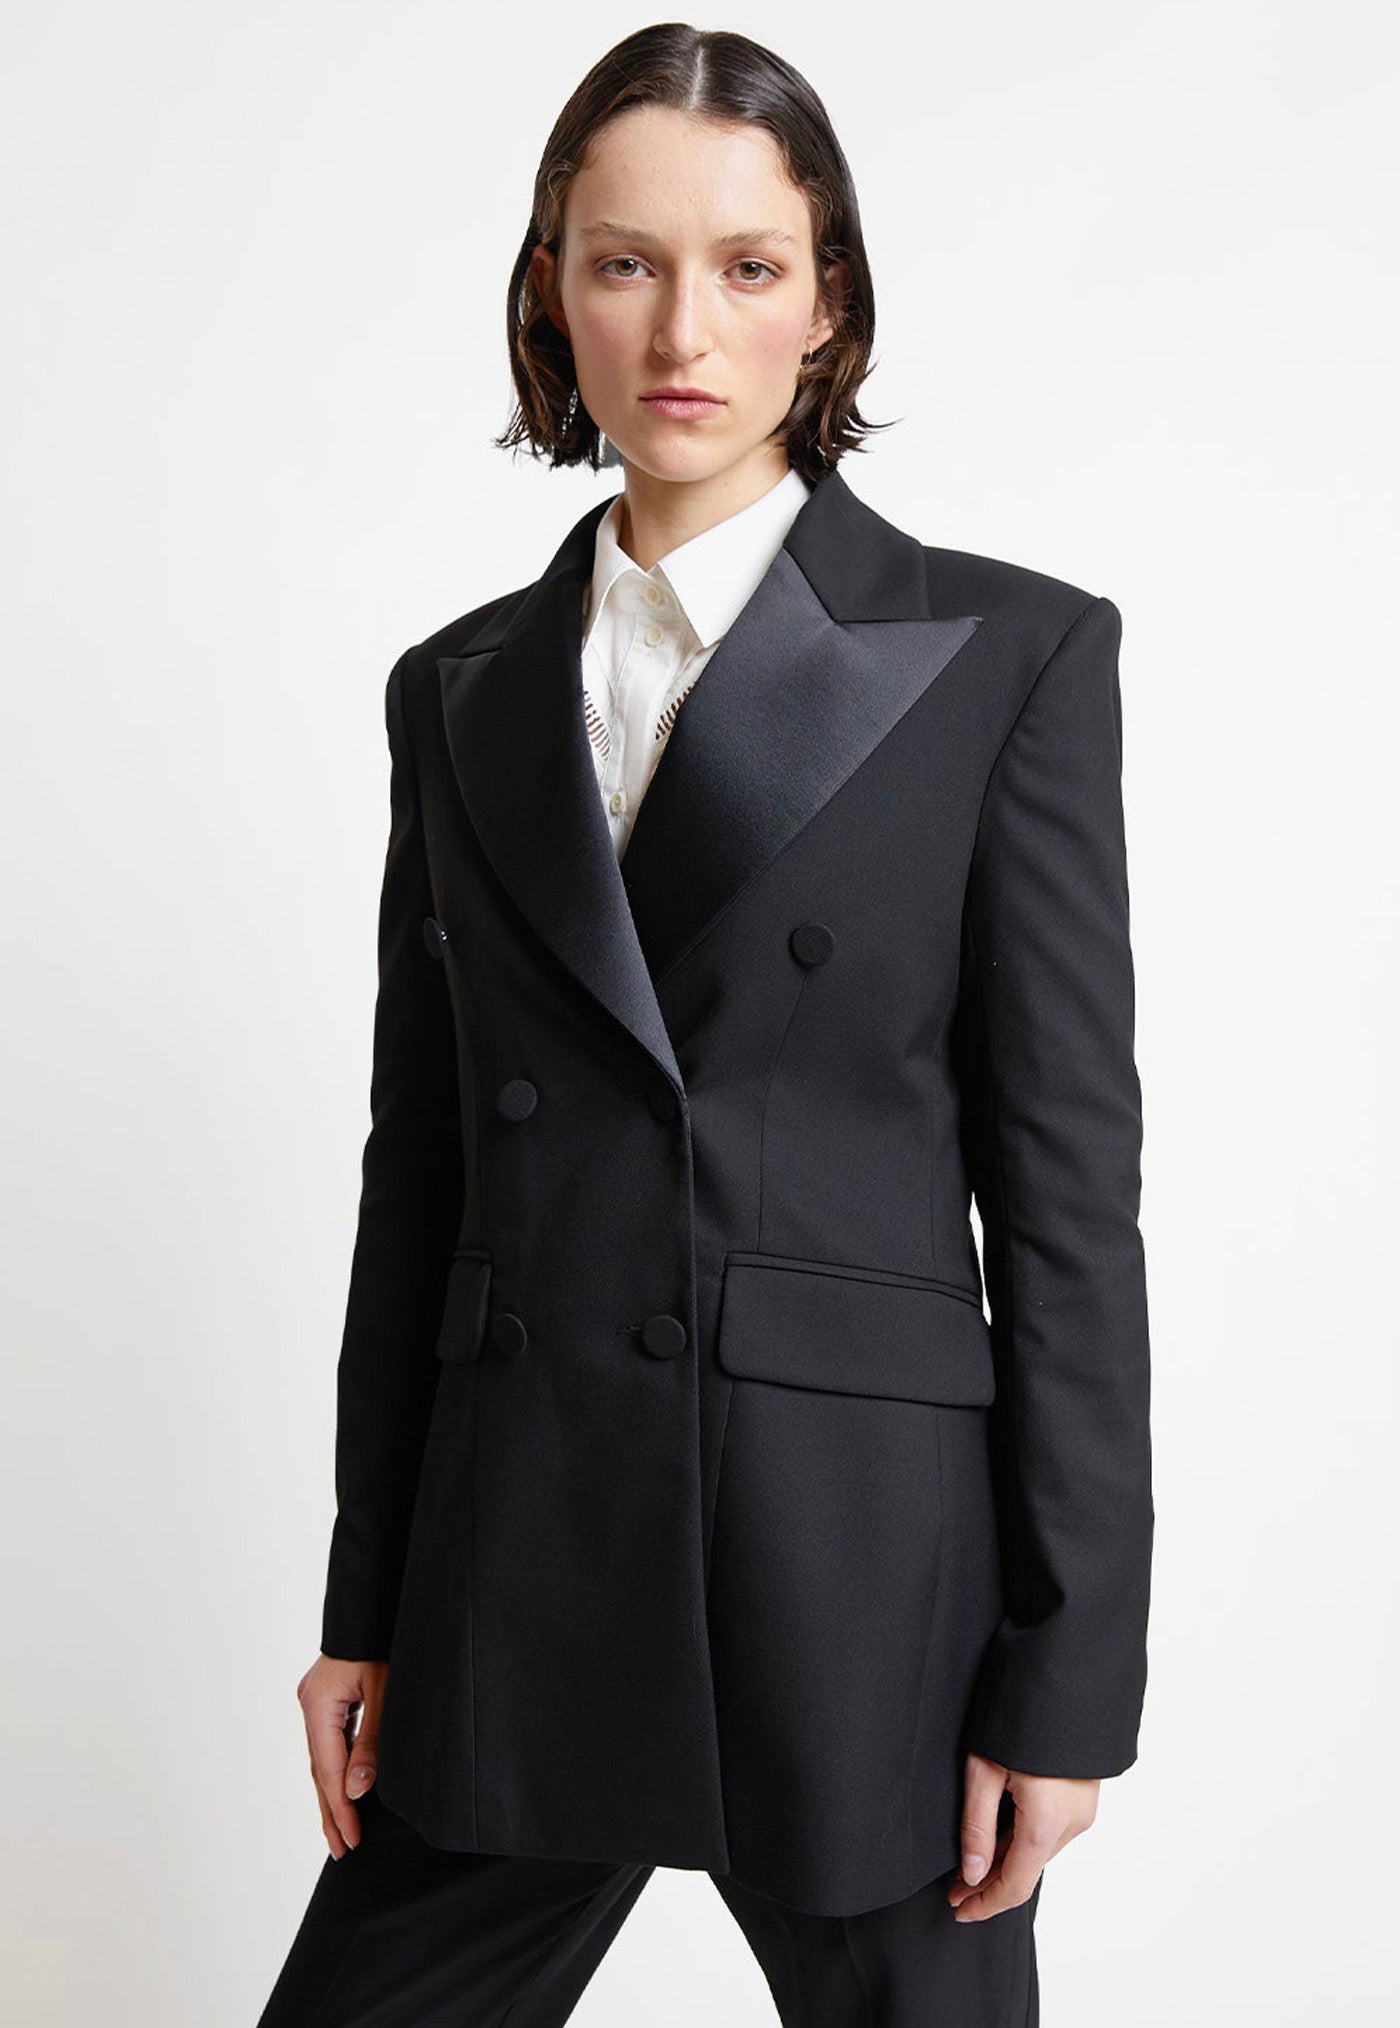 Tuxedo Double Breasted Blazer - Black sold by Angel Divine